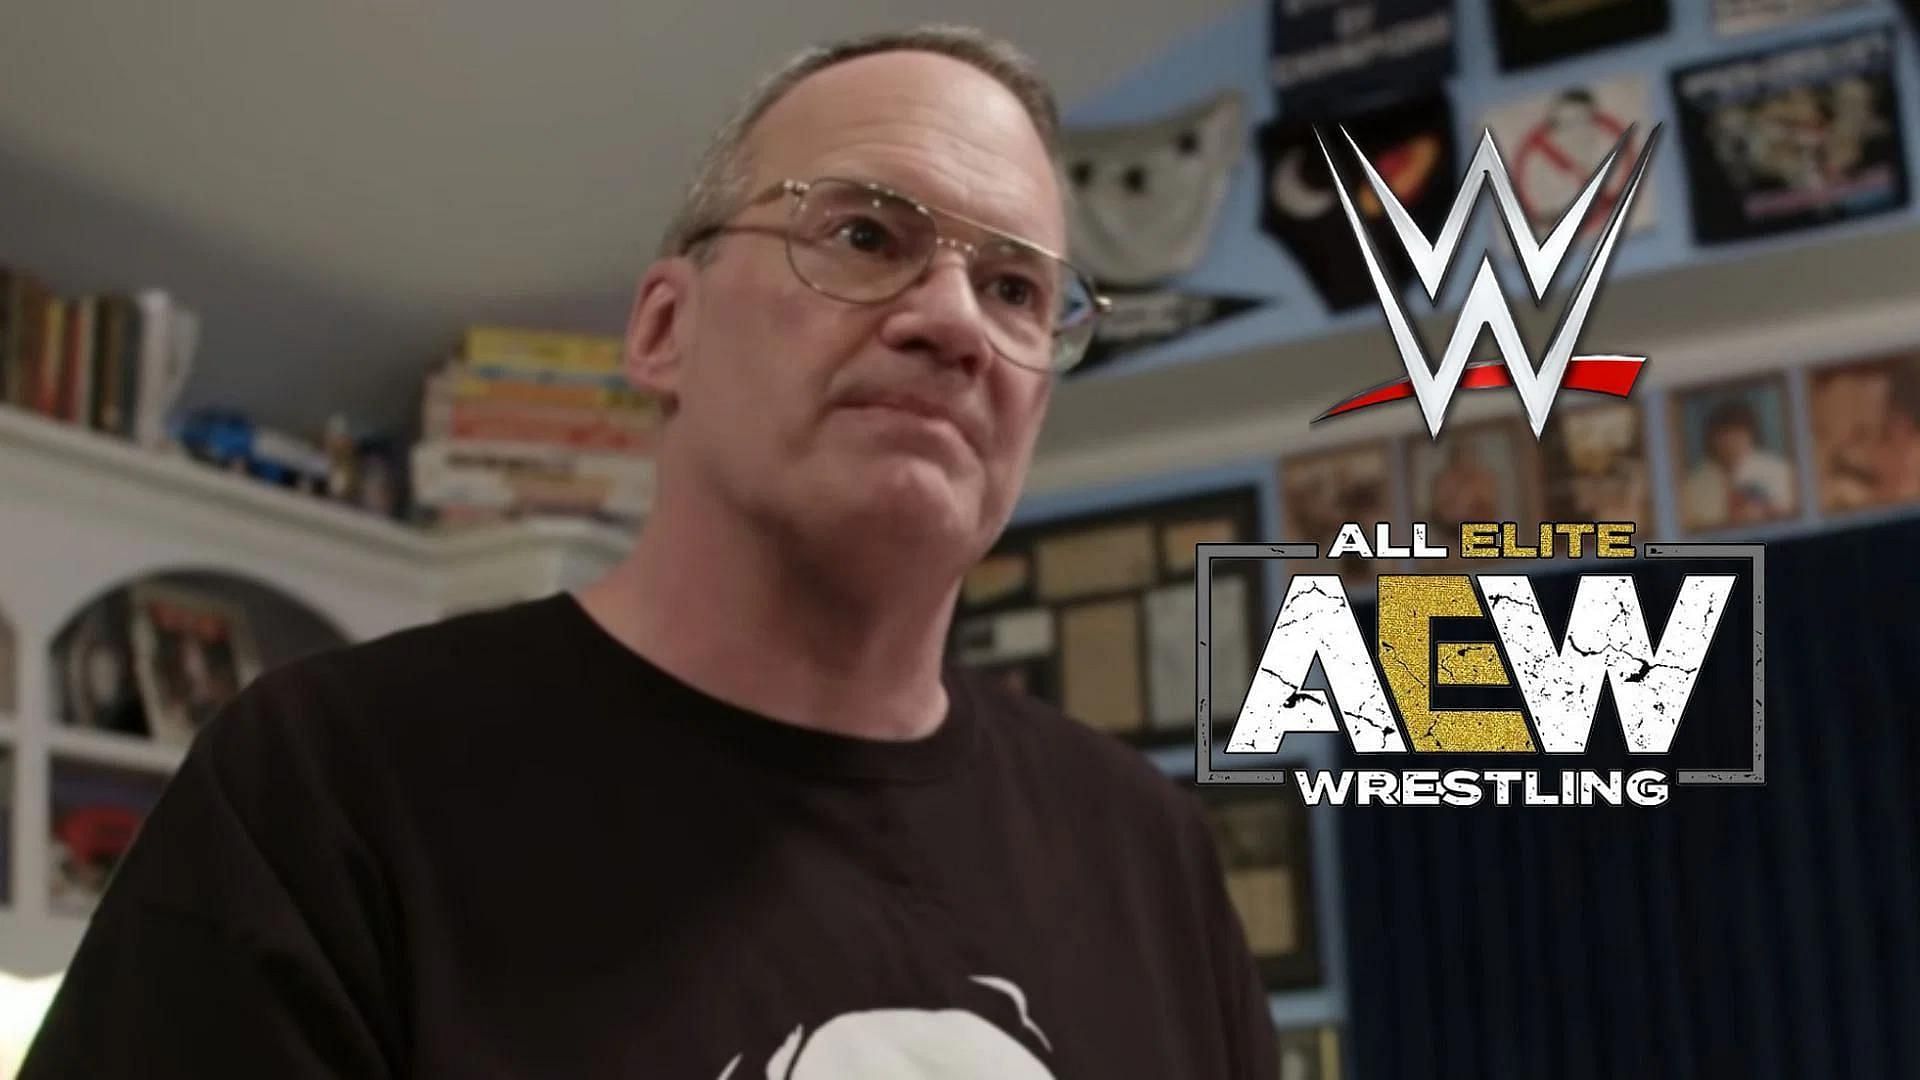 Jim Cornette had some harsh things to say this week